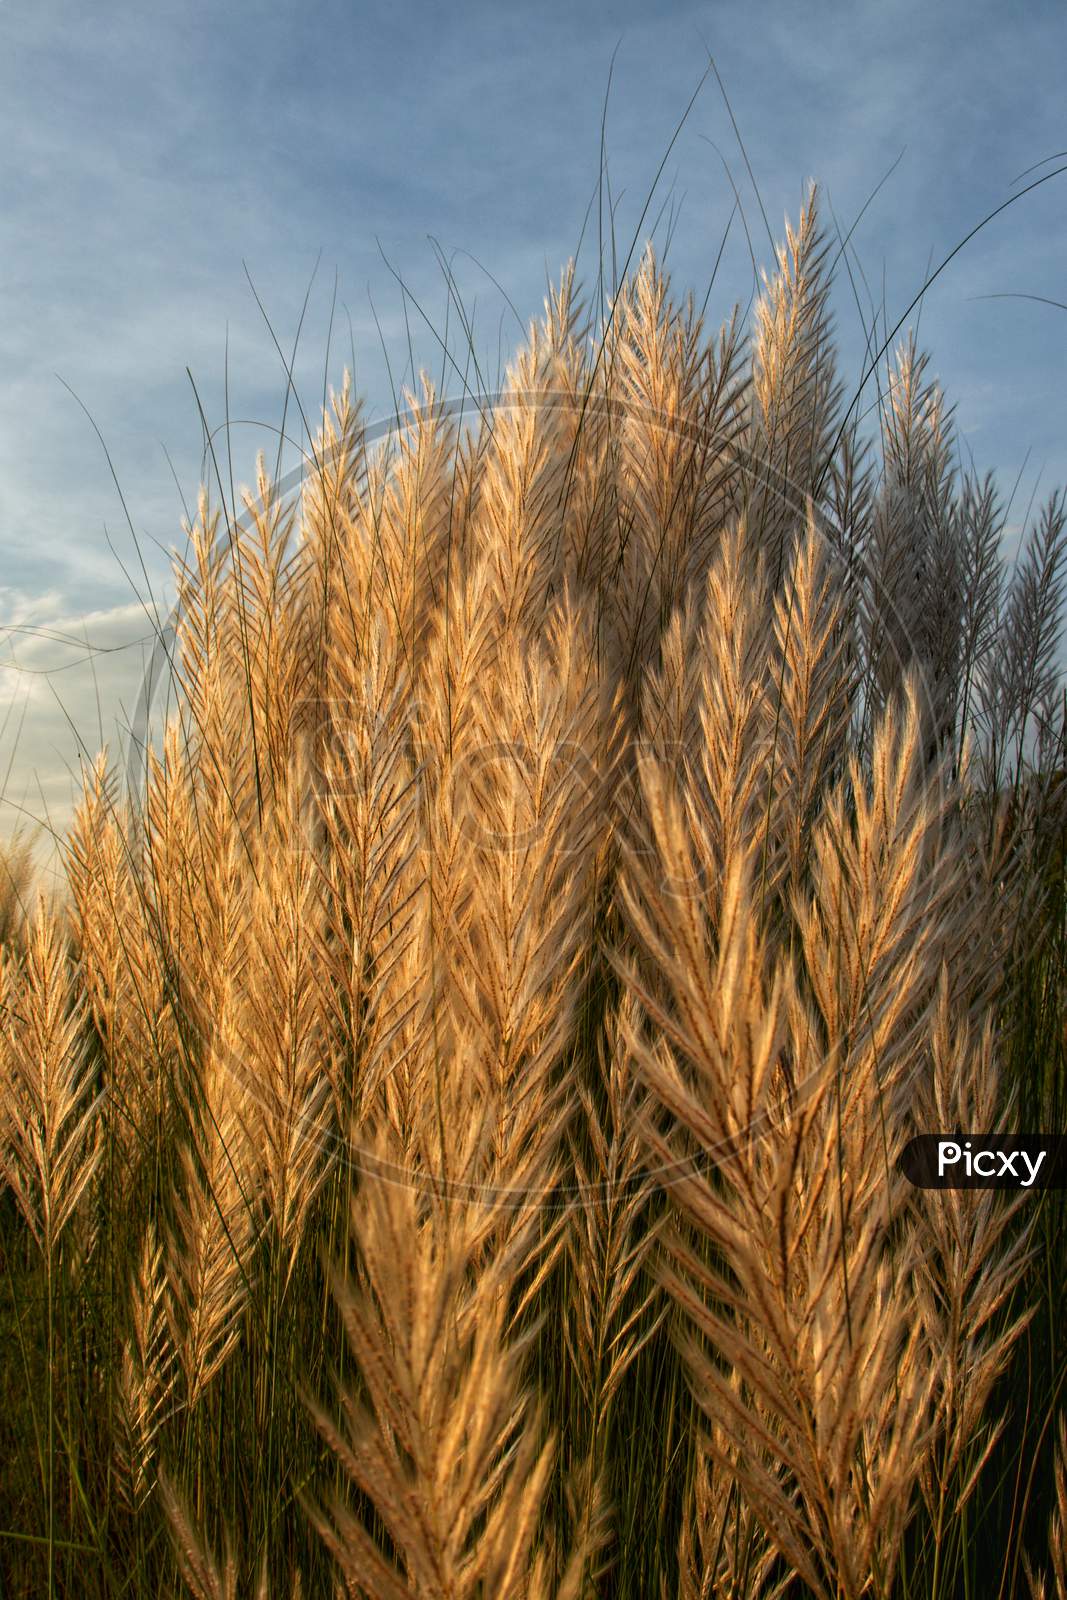 Saccharum Spontaneum Or Wild Sugarcane, Also Known As Kans Grass Or Kash Phool With Selective Focus In Vertical Orientation